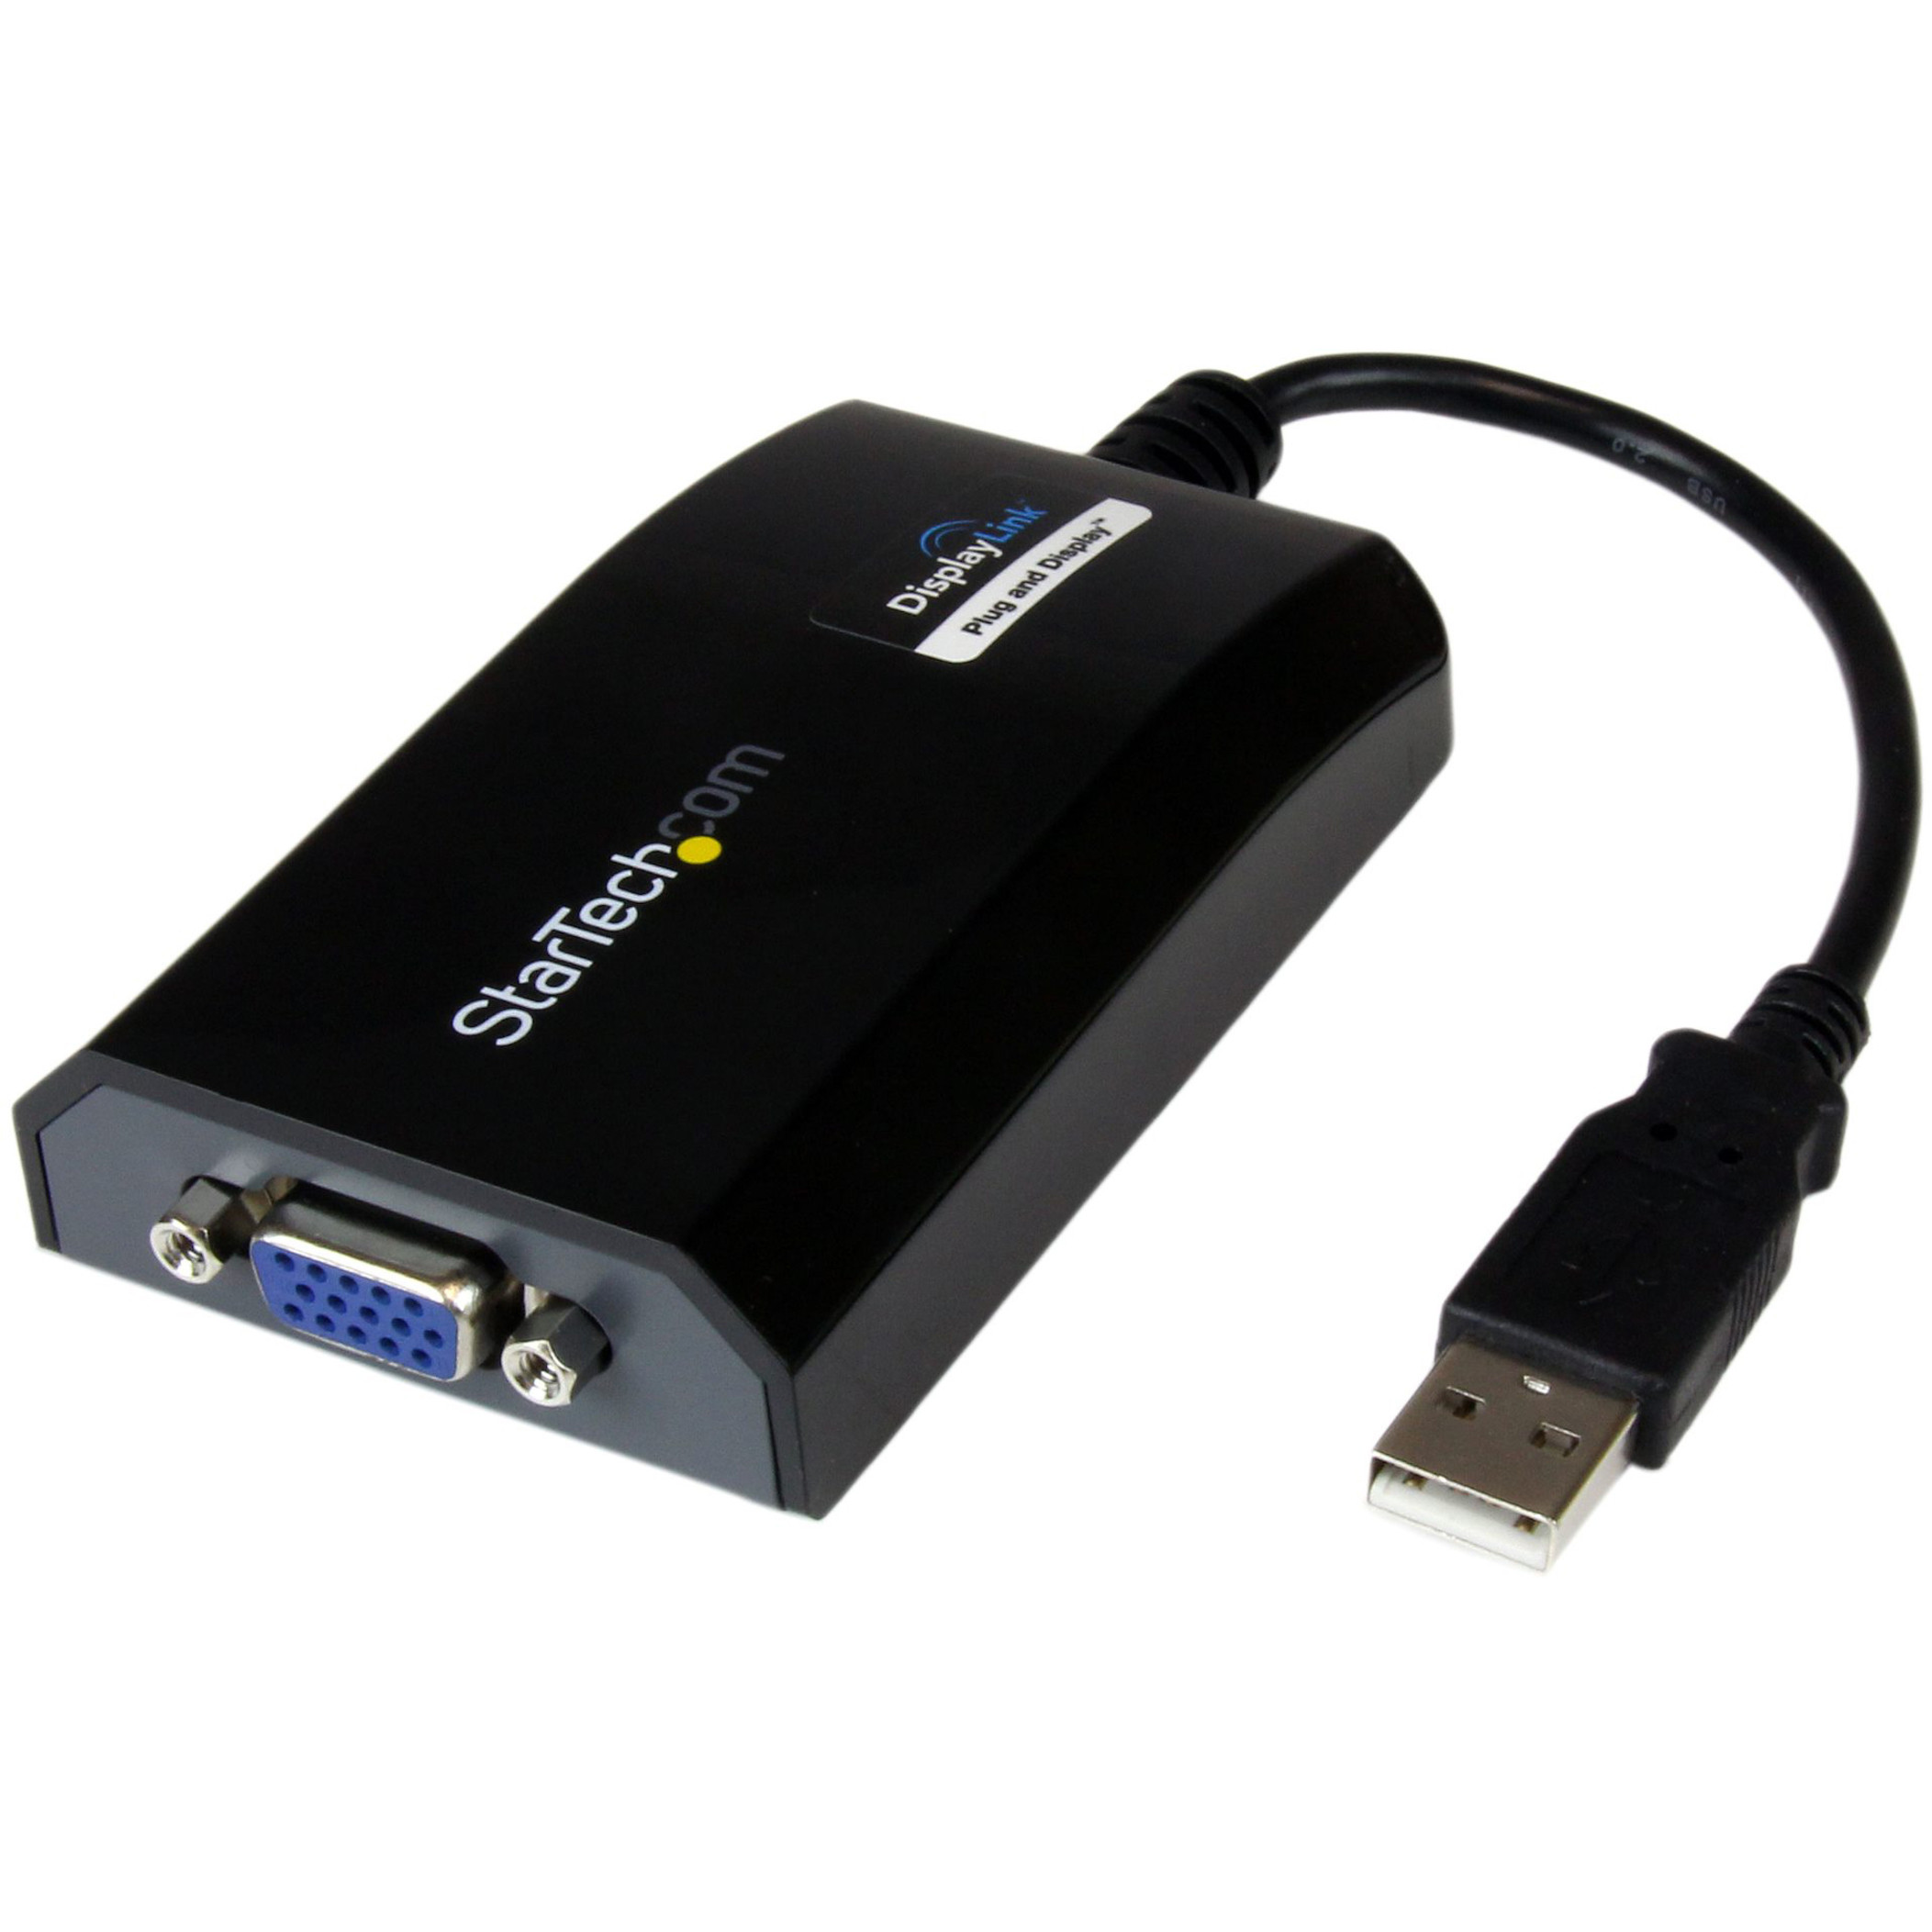 Startech .com USB to VGA AdapterExternal USB Video Graphics Card for PC and MAC- 1920x1200Connect a VGA display for an extended desktop… USB2VGAPRO2